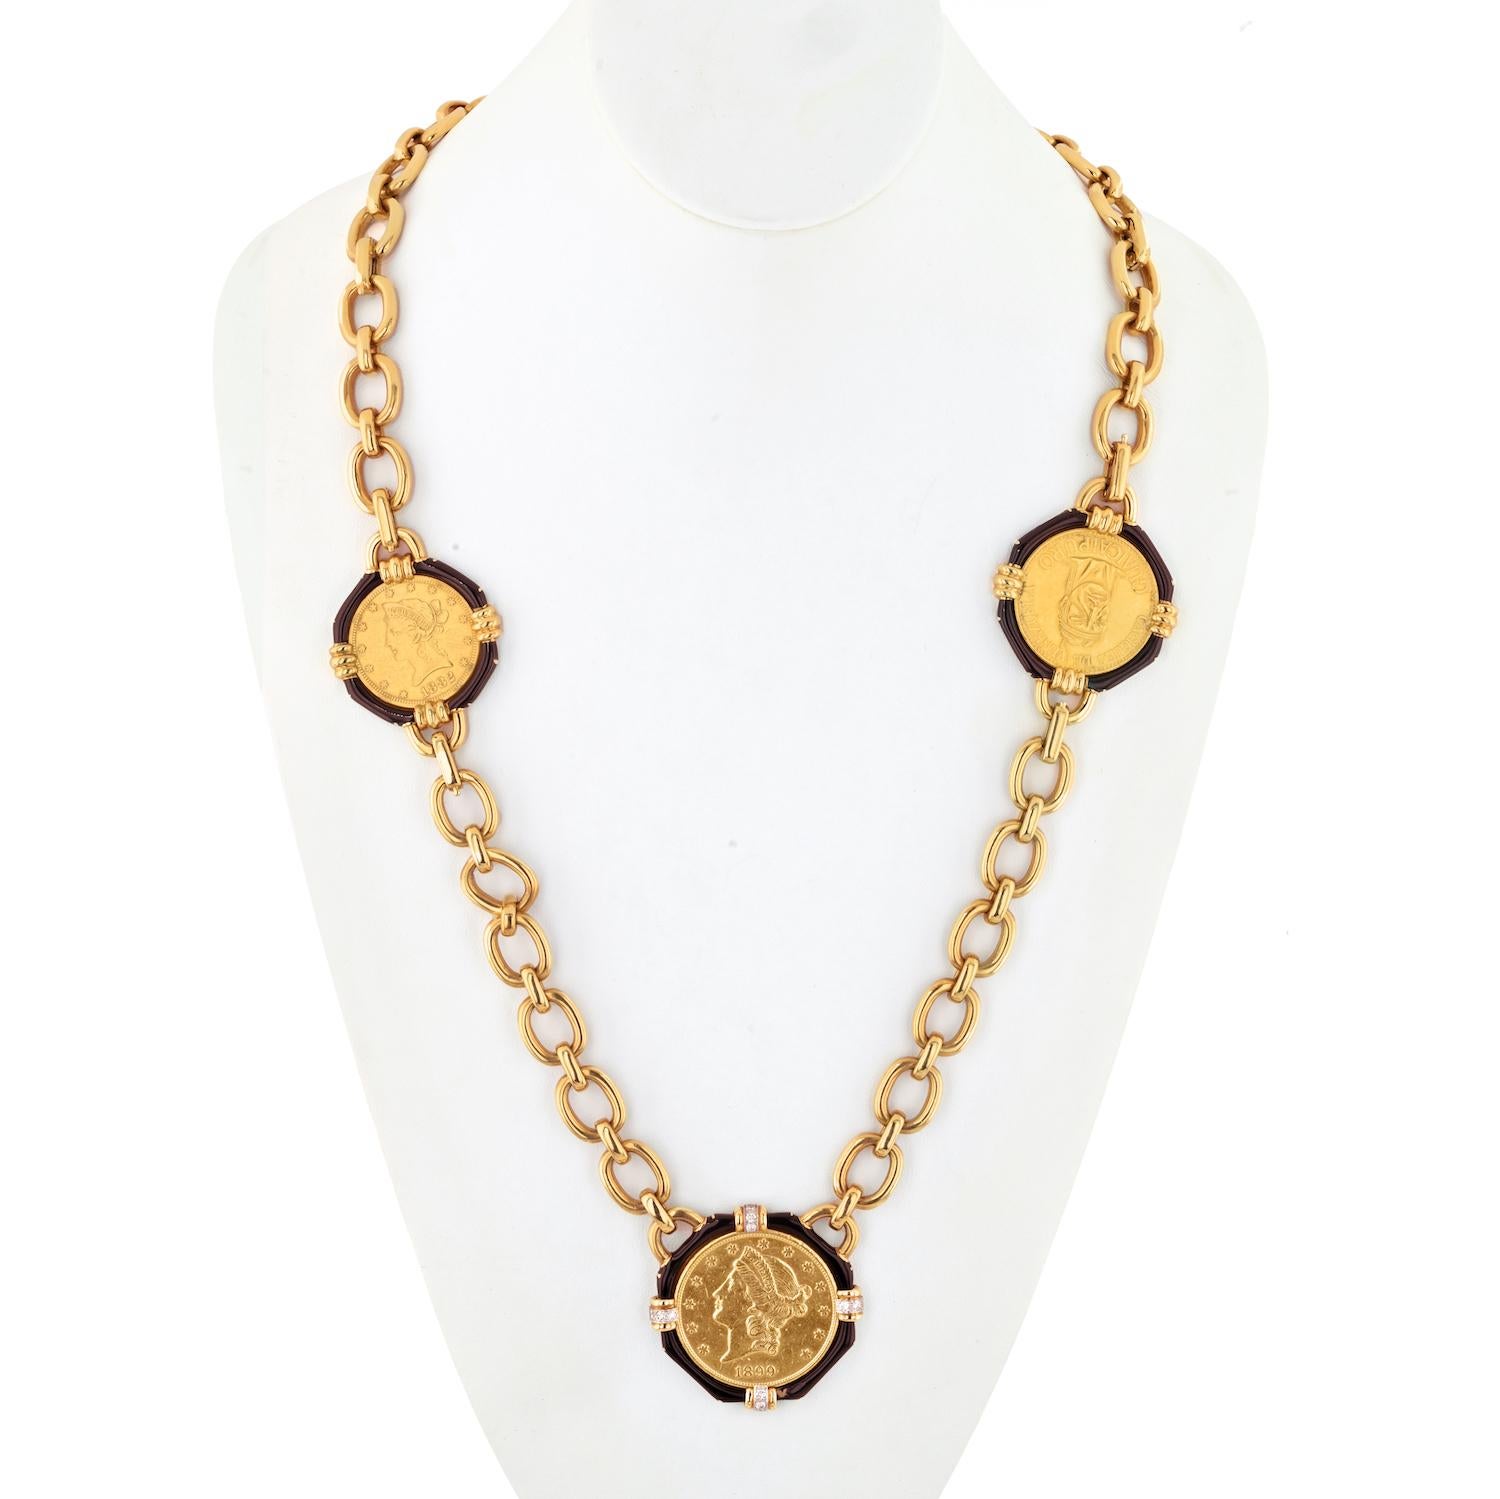 Drape yourself in opulence with the David Webb 18K Yellow Gold 5 Coin Black Enamel Long Link Necklace, an extraordinary piece that seamlessly marries craftsmanship and heritage. This 36-inch necklace, designed by David Webb, offers not only a